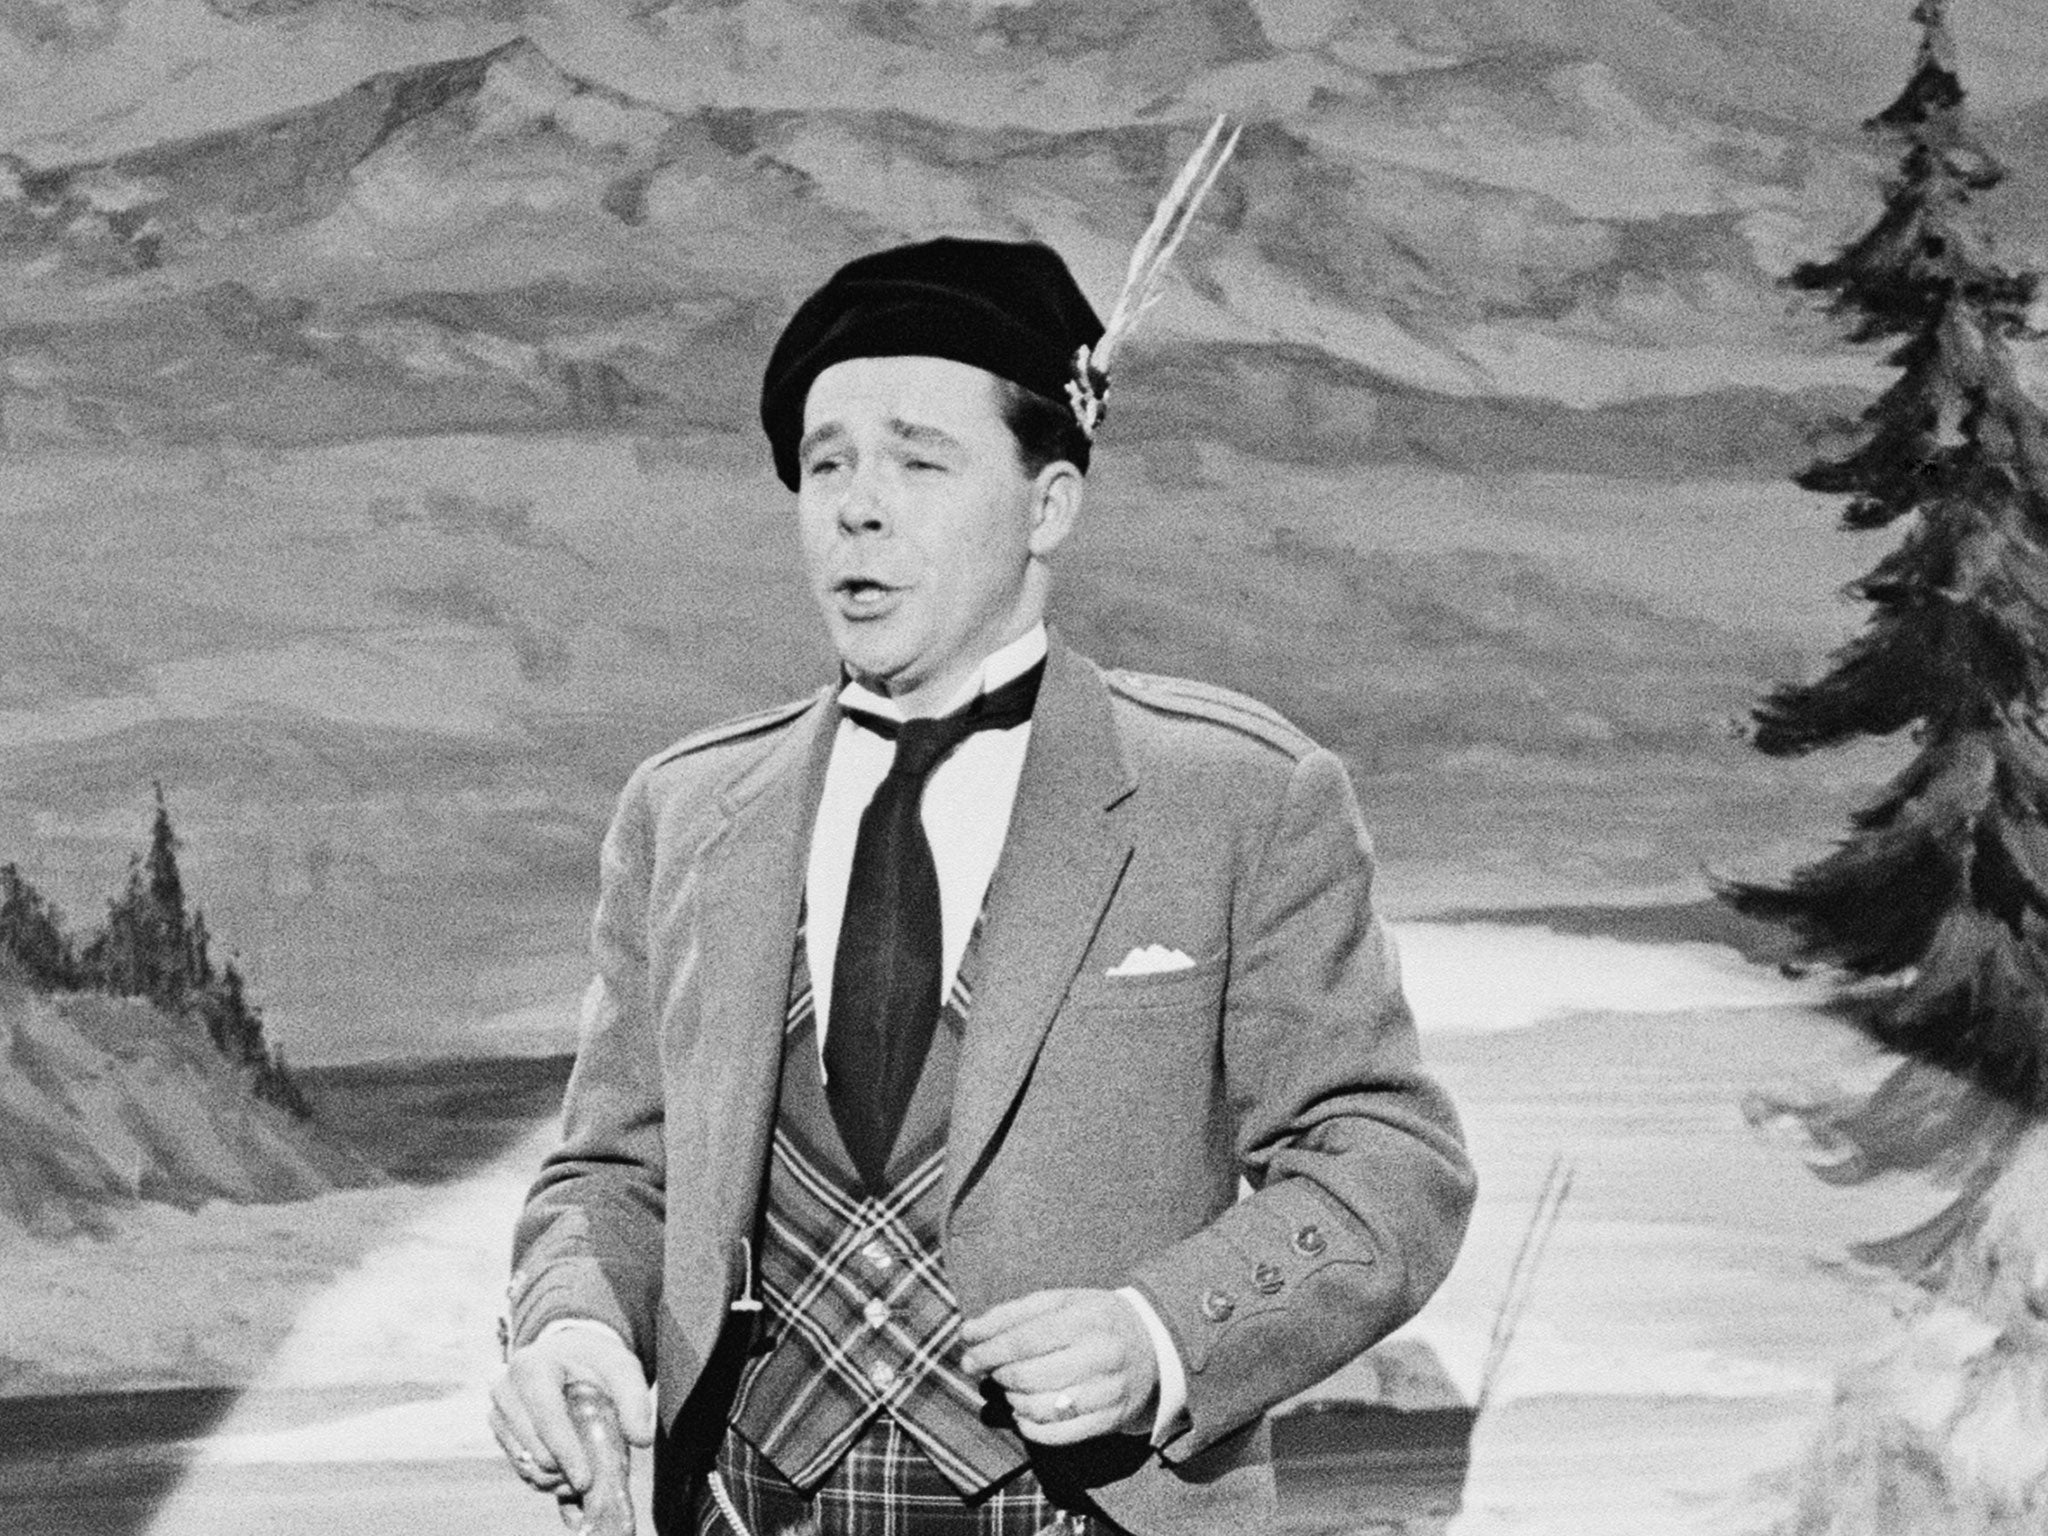 Scottish singer and entertainer Andy Stewart during the recording of a television show for Winston Curchill's 90th birthday, 8 November 1964